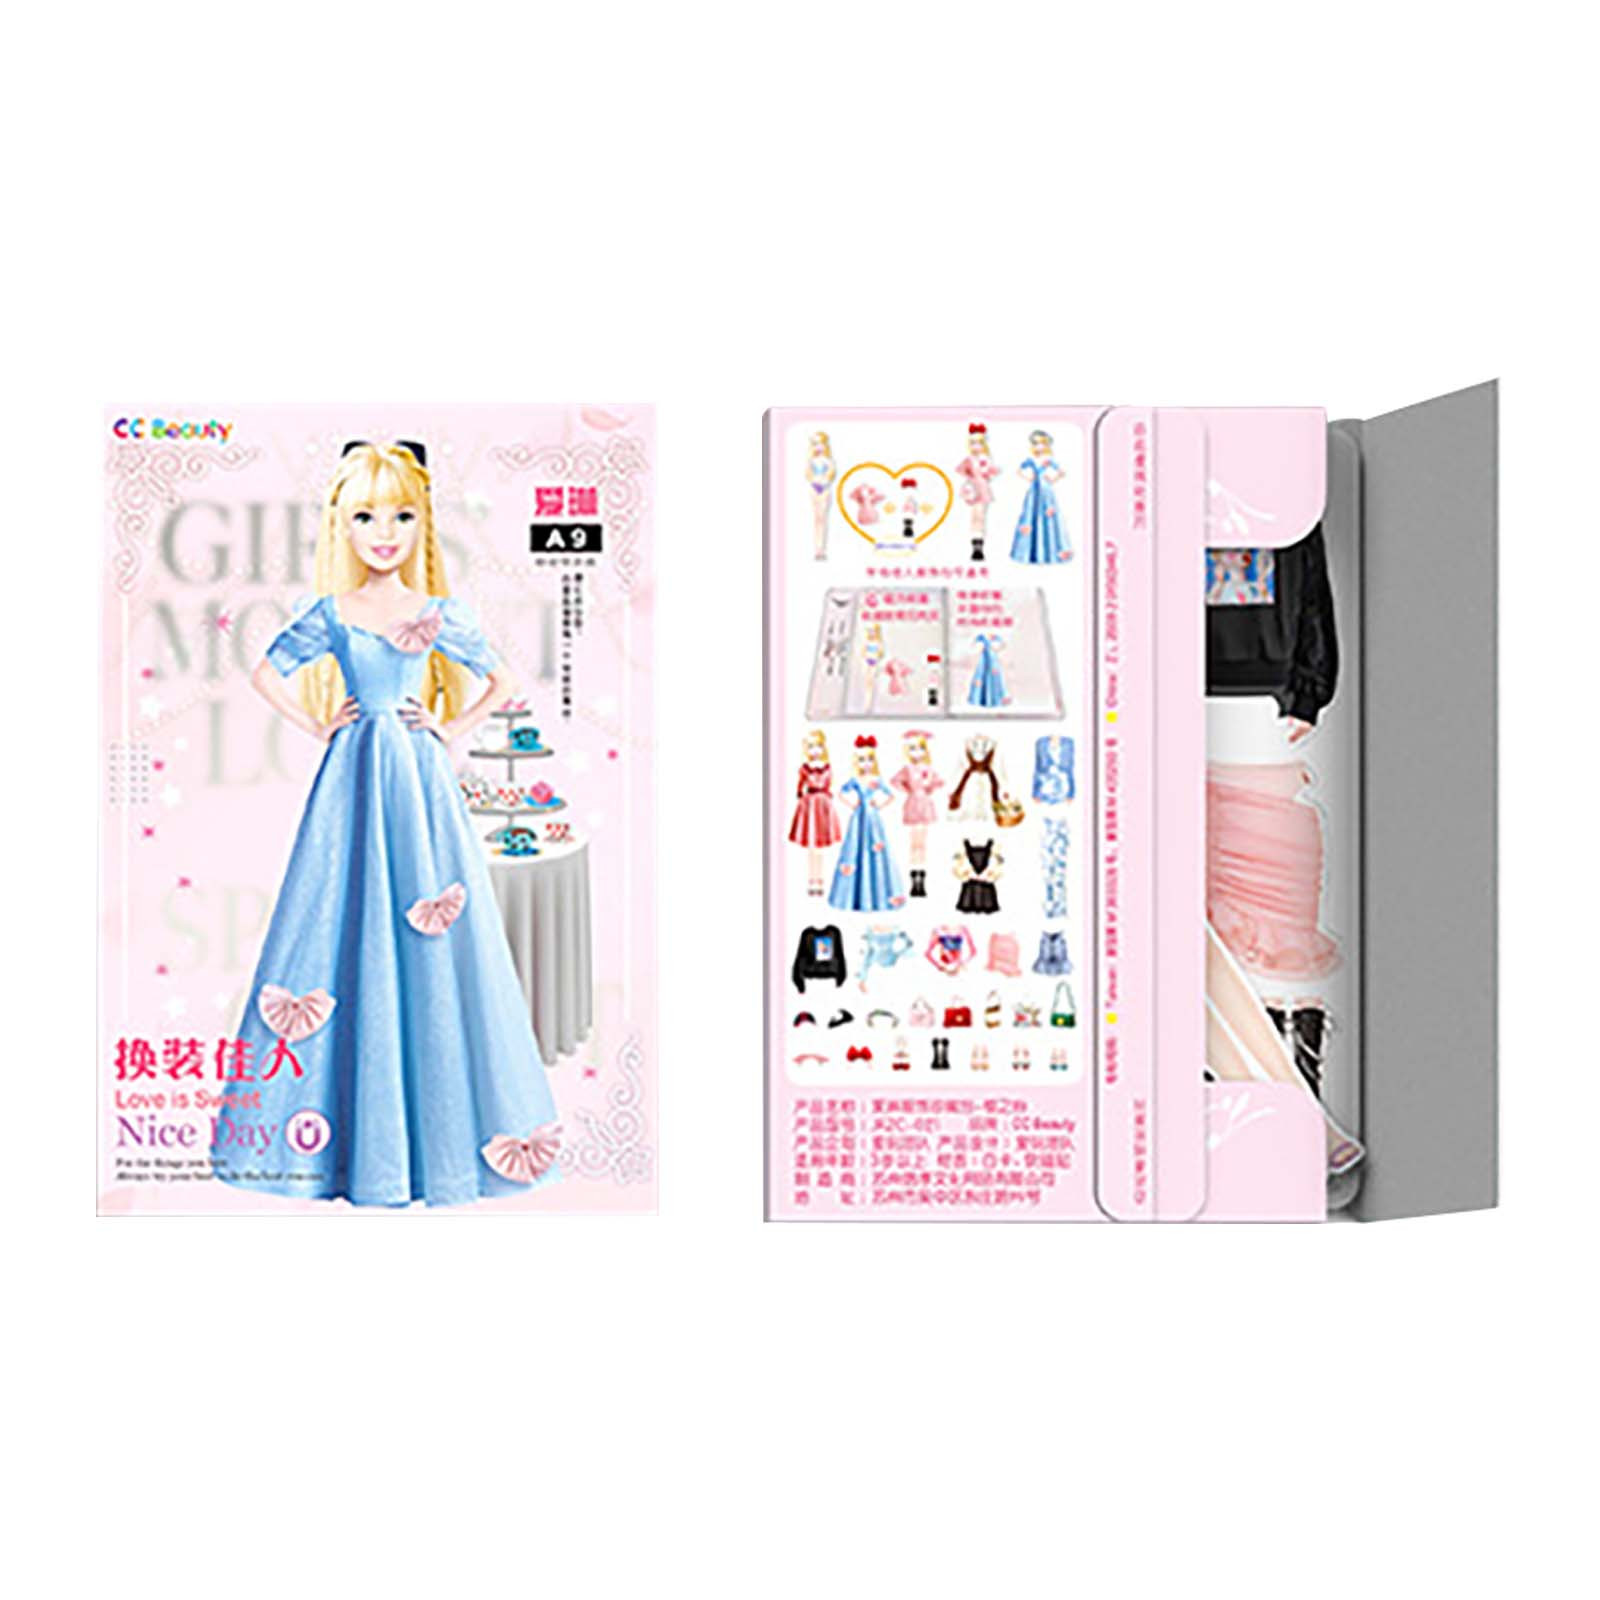 TUWABEII Games and Puzzles for Kids,Magnetic Dress Up Baby Magnetic Princess Dress Up Paper Doll Magnet Dress Up Pretend And Play Travel Playset Toy Magnetic Dress Up Dolls For Girls Kid's Gift - image 2 of 6